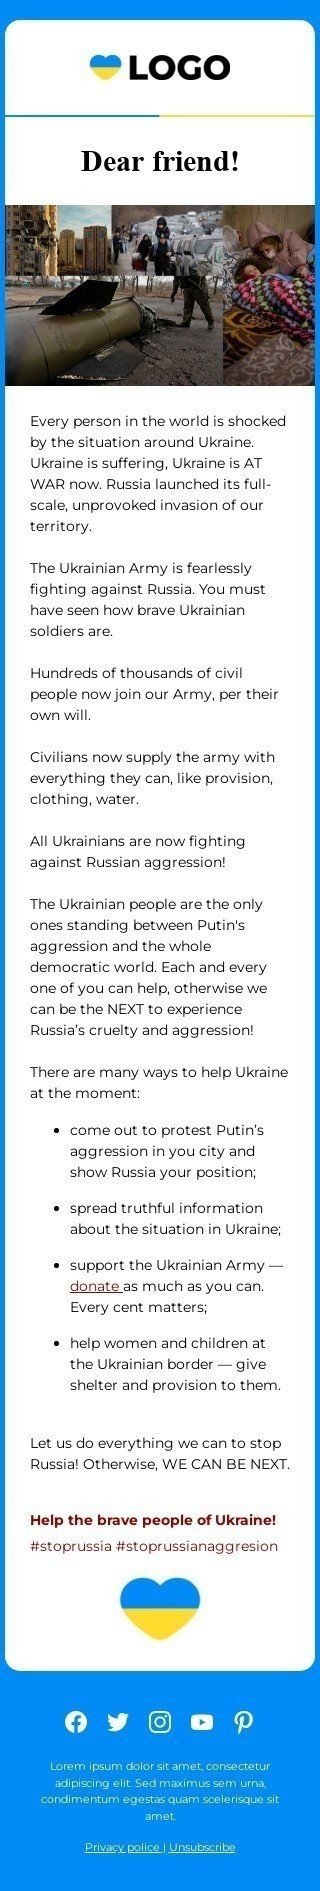 The "Spread a word Russian Aggression in Ukraine" email template Affichage mobile